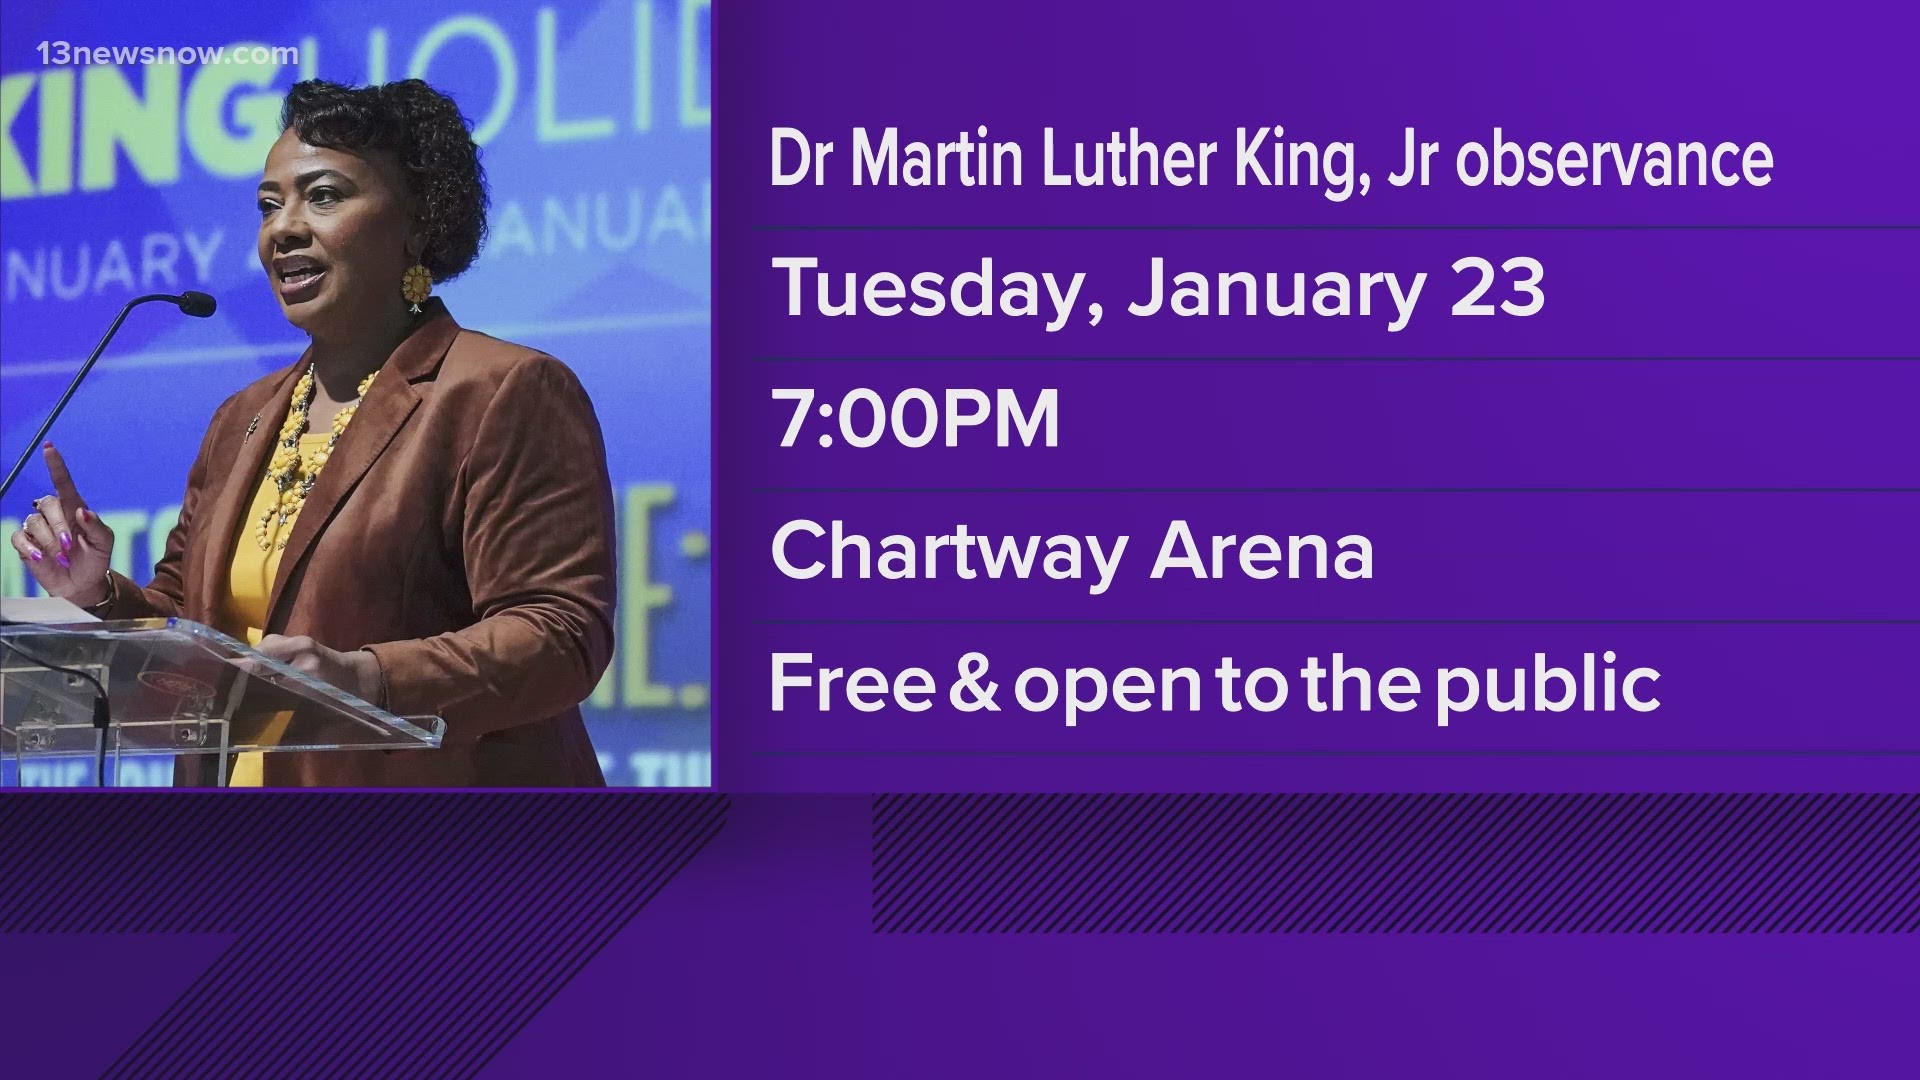 It's ODU's 39th Annual MLK Jr. Observance. The free, public event will be held at Chartway Arena on Jan. 23.